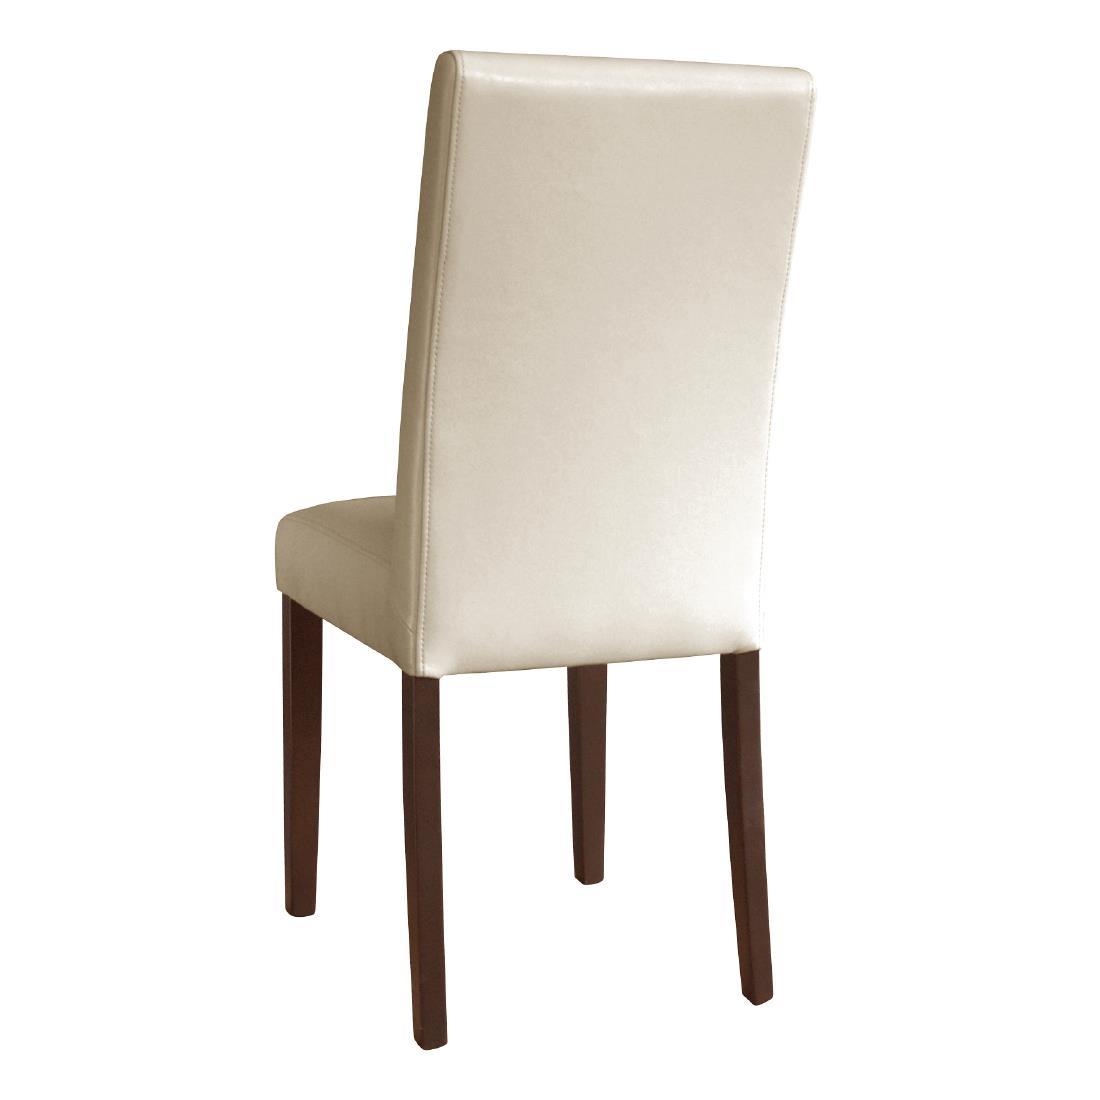 Bolero Faux Leather Dining Chairs Cream (Pack of 2) - GH444  - 2